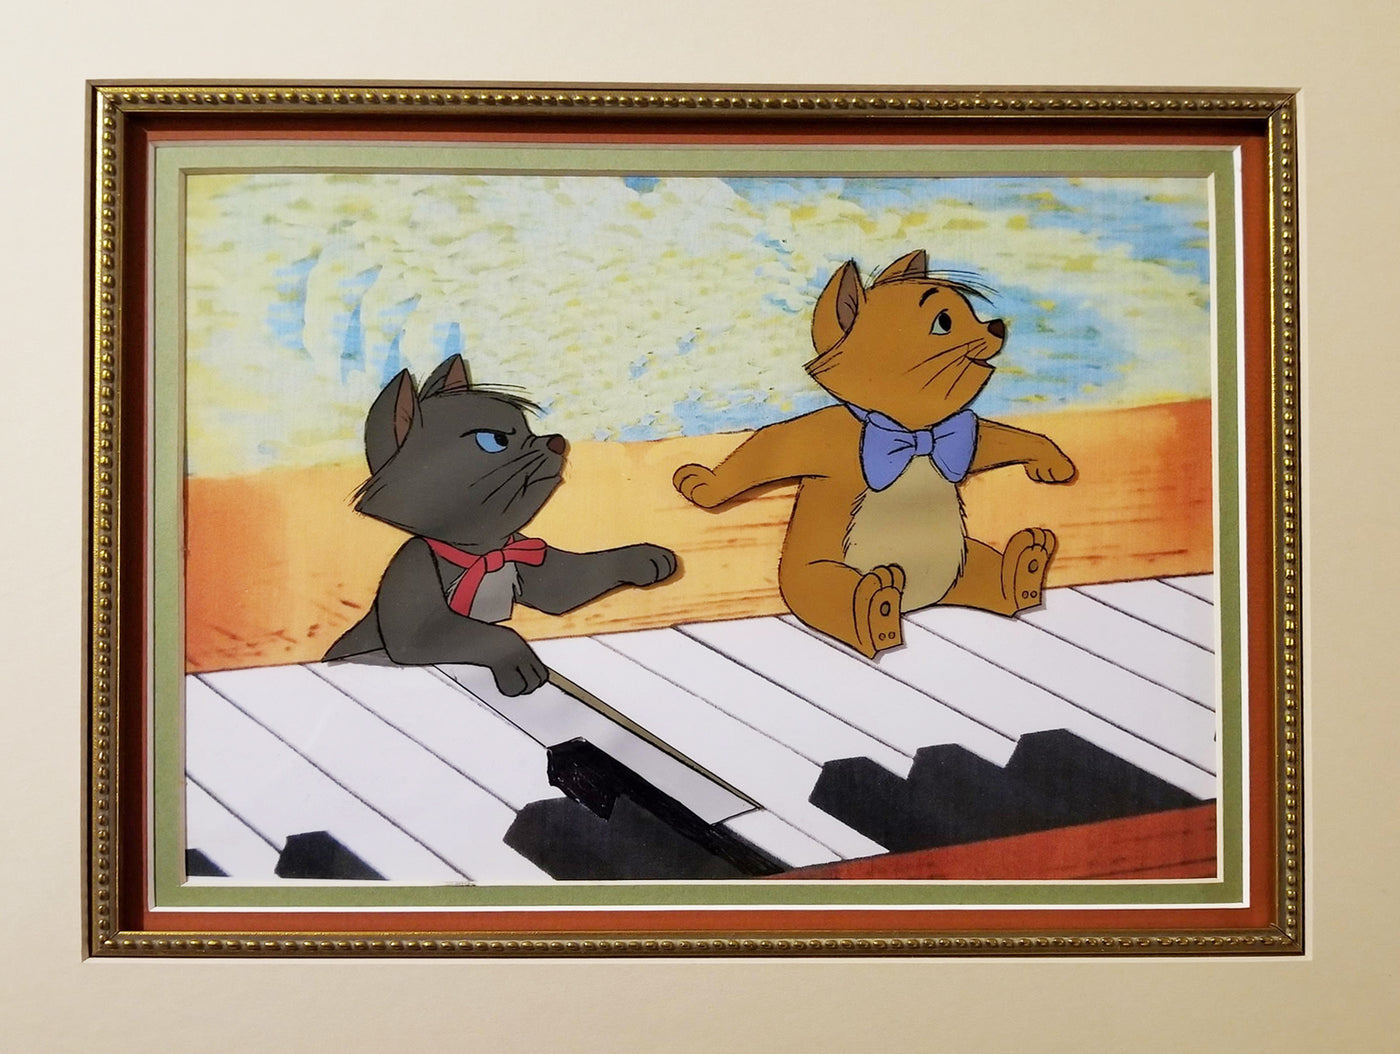 Original Walt Disney Production Cel from The Aristocats featuring Toulouse